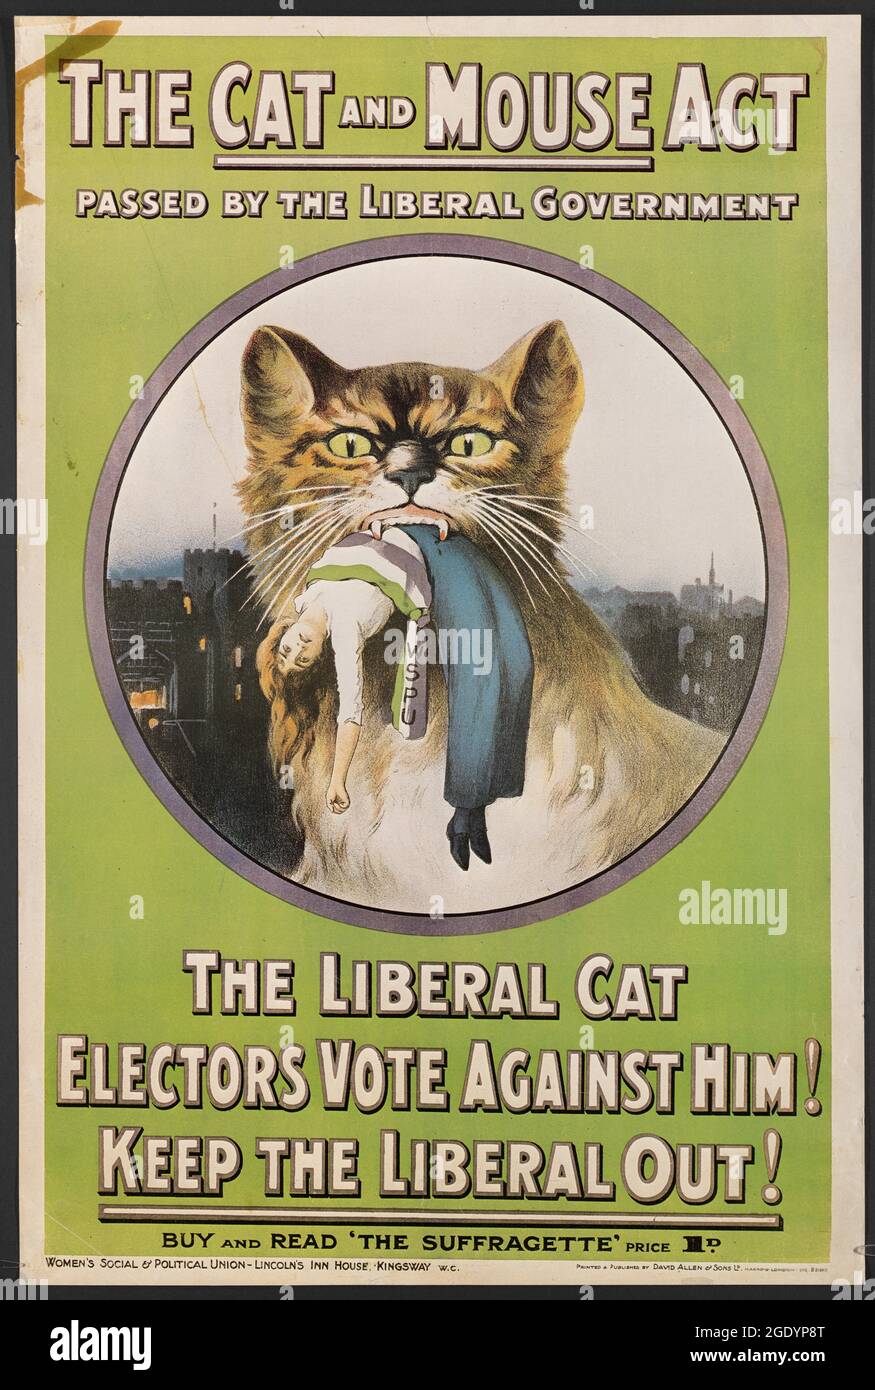 The cat and mouse act passed by the Liberal government... buy and read The Suffragette. Stock Photo